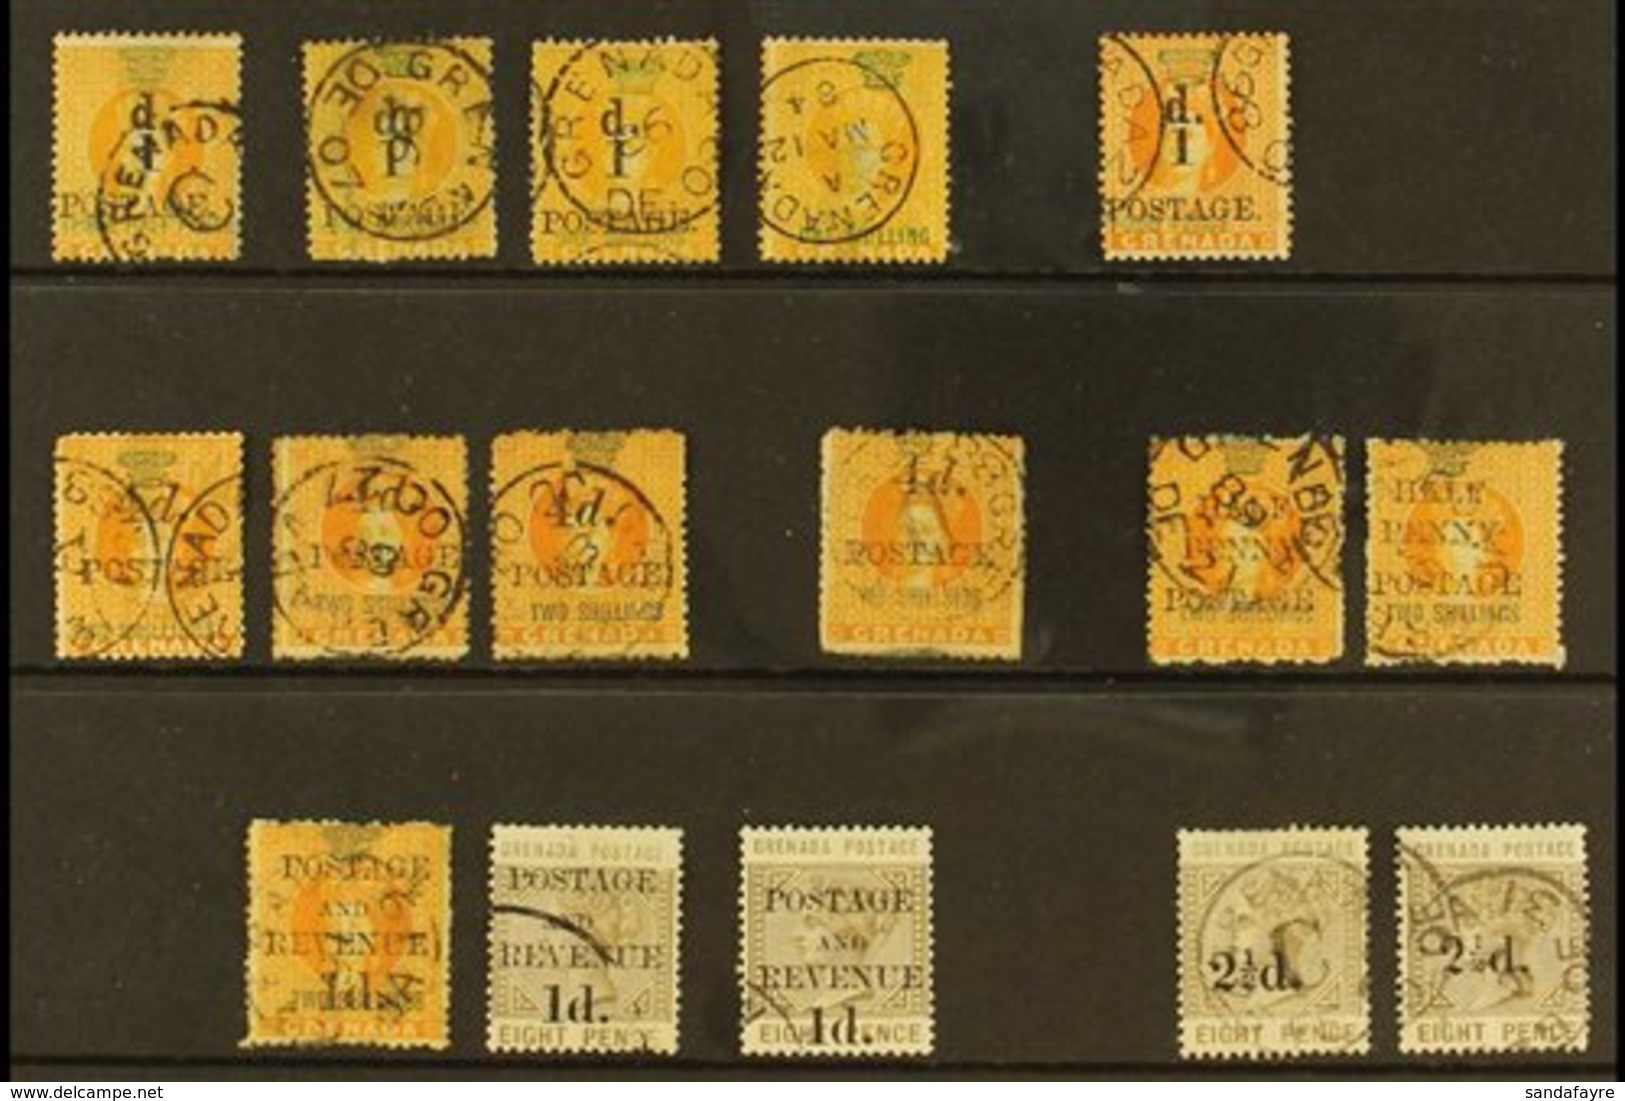 1886-91 FINE USED SURCHARGES - Group Incl. 1886 1d On 1½d SG 37, 1d On 1s (2) SG 38 (plus 1s Revenue Without Surcharge), - Grenade (...-1974)